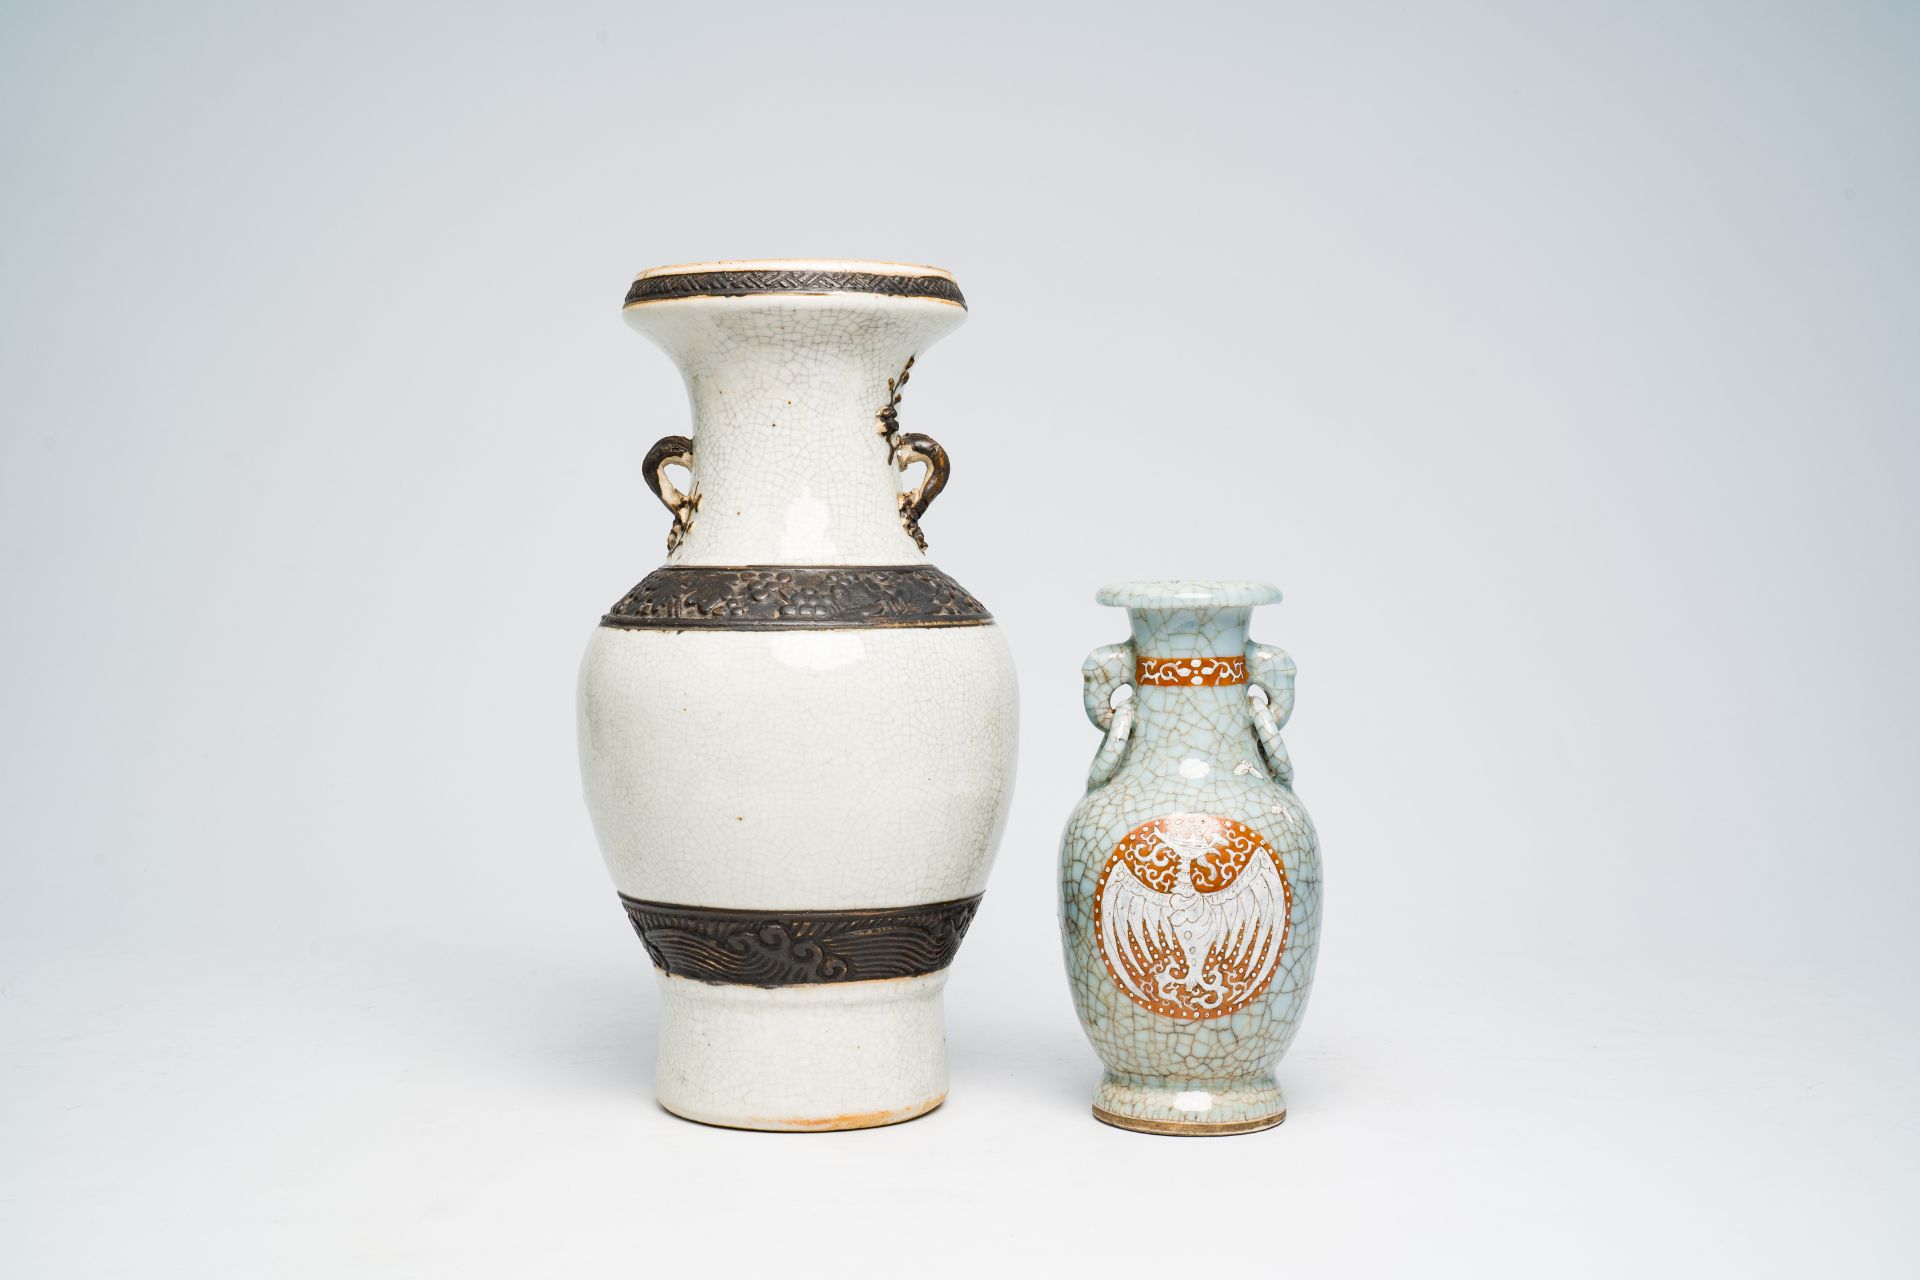 A Chinese Nanking crackle glazed vase with relief design and a polychrome celadon crackle glazed 'ph